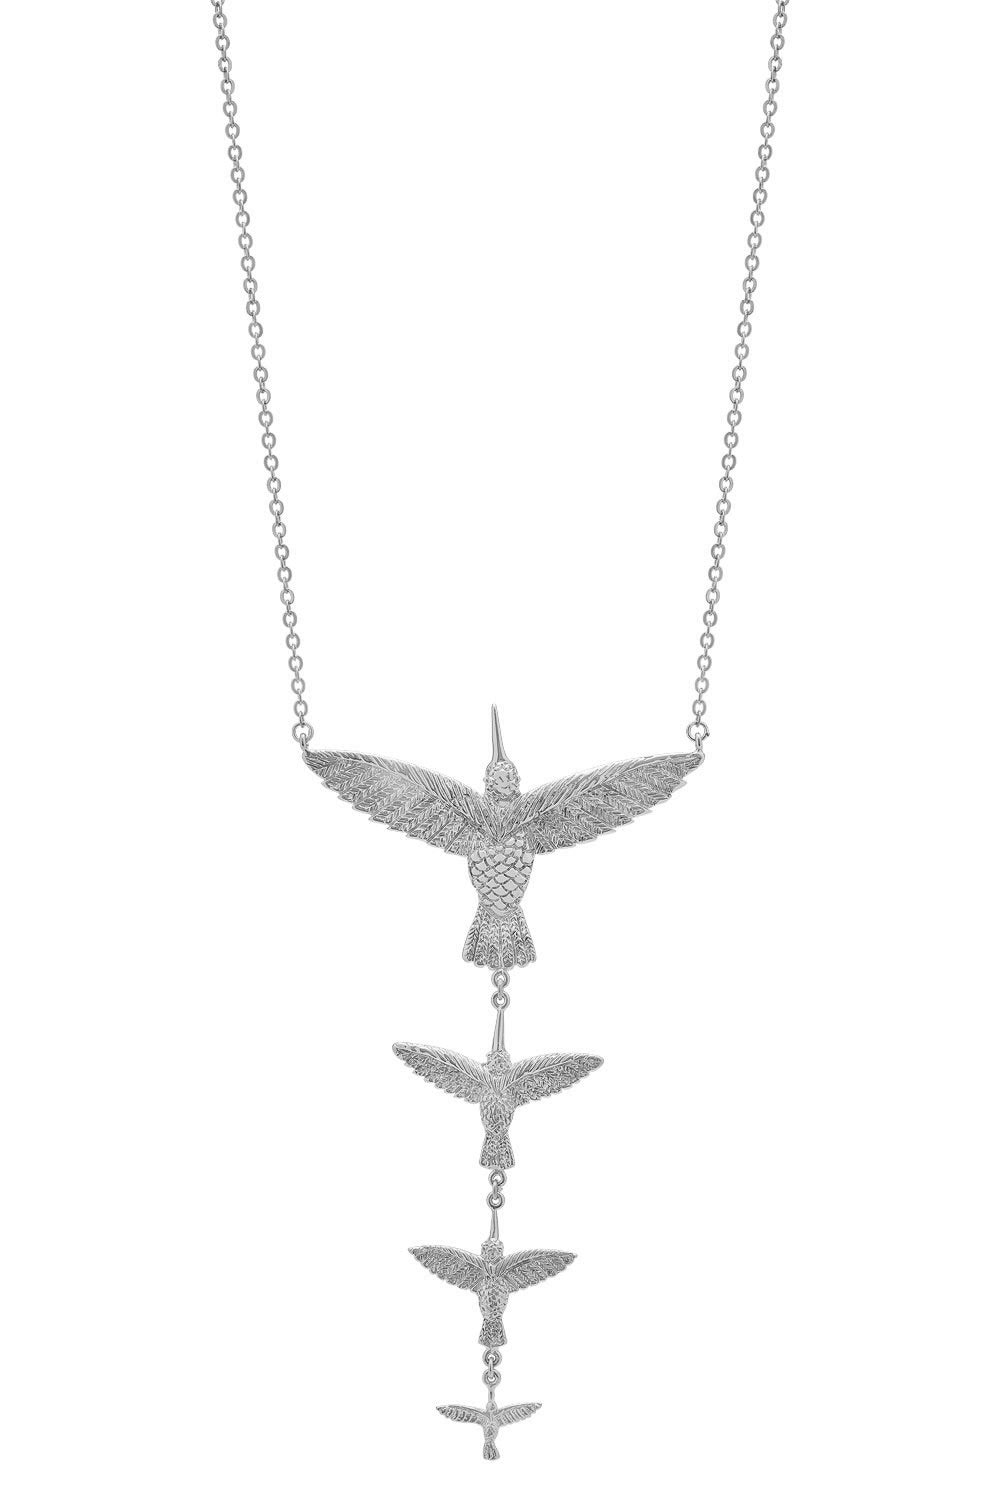 Sophie Simone Designs Women's Necklace Four Hummingbirds - Silver In Neutral